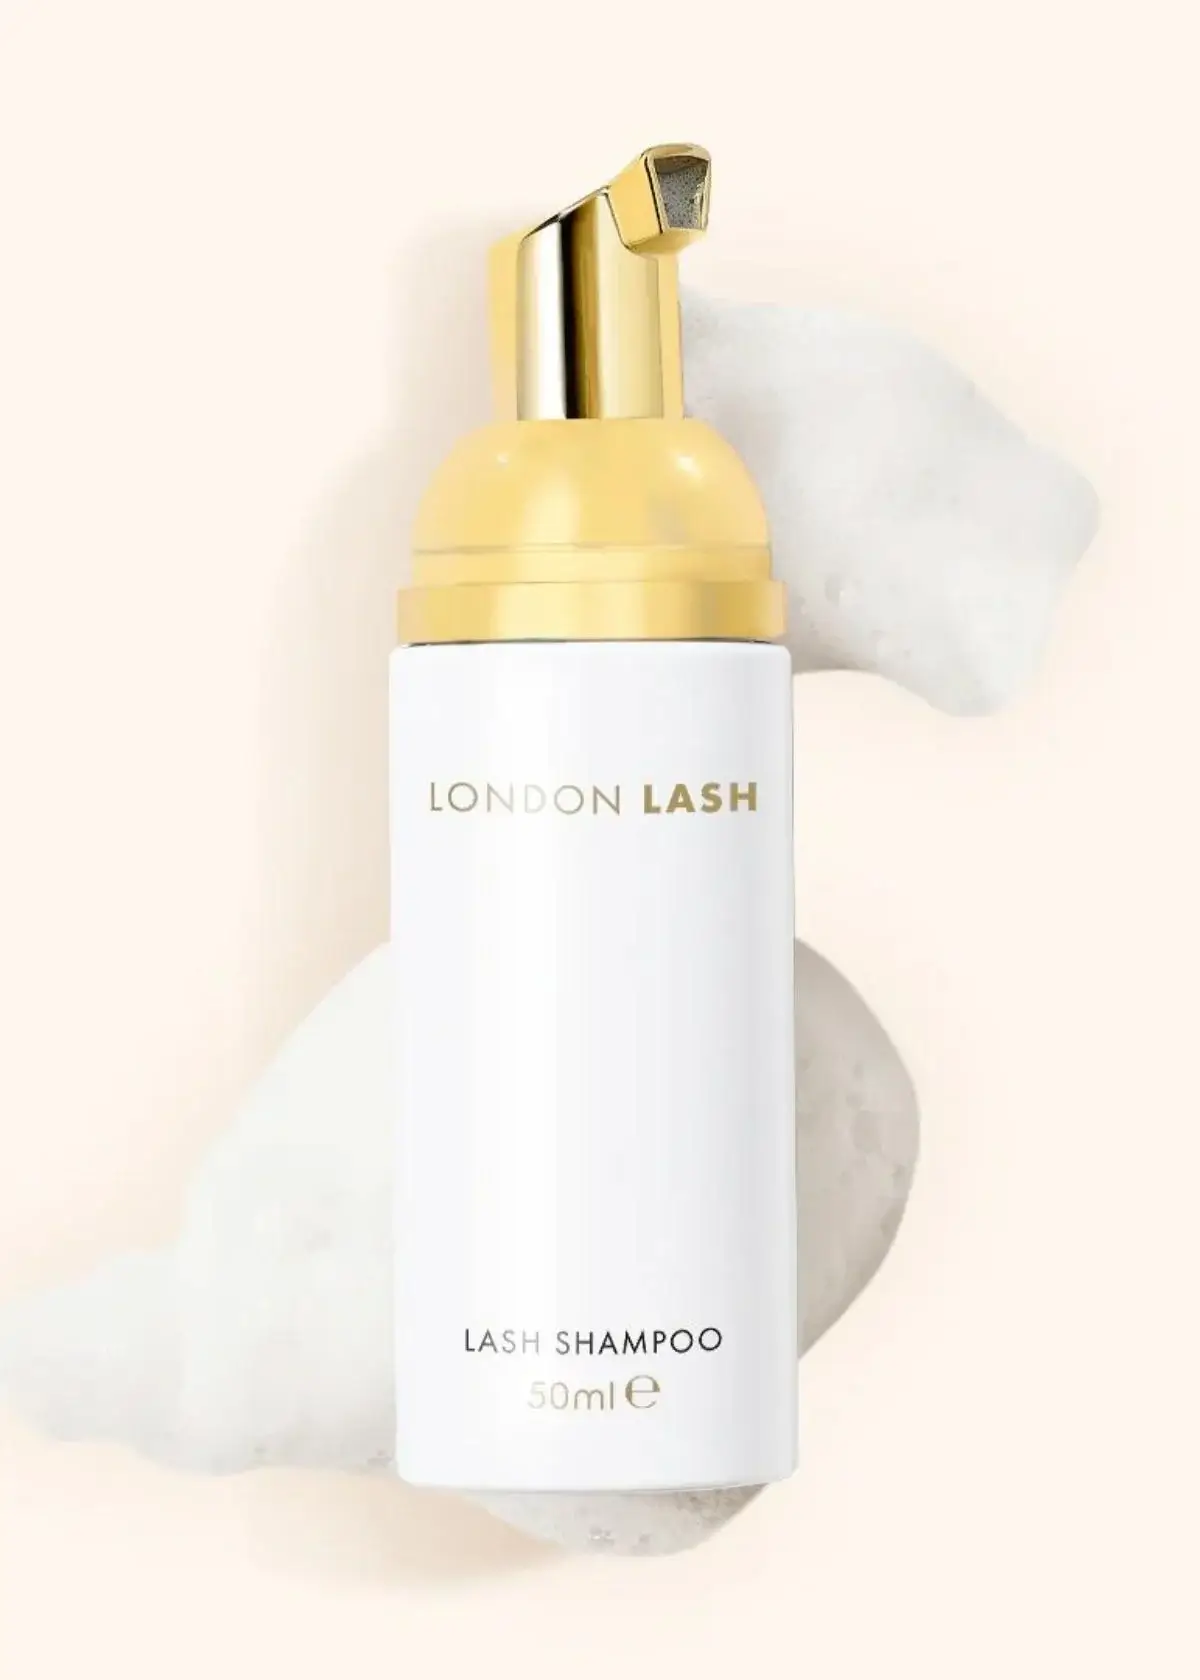 How to choose the right eyelash extension shampoo?